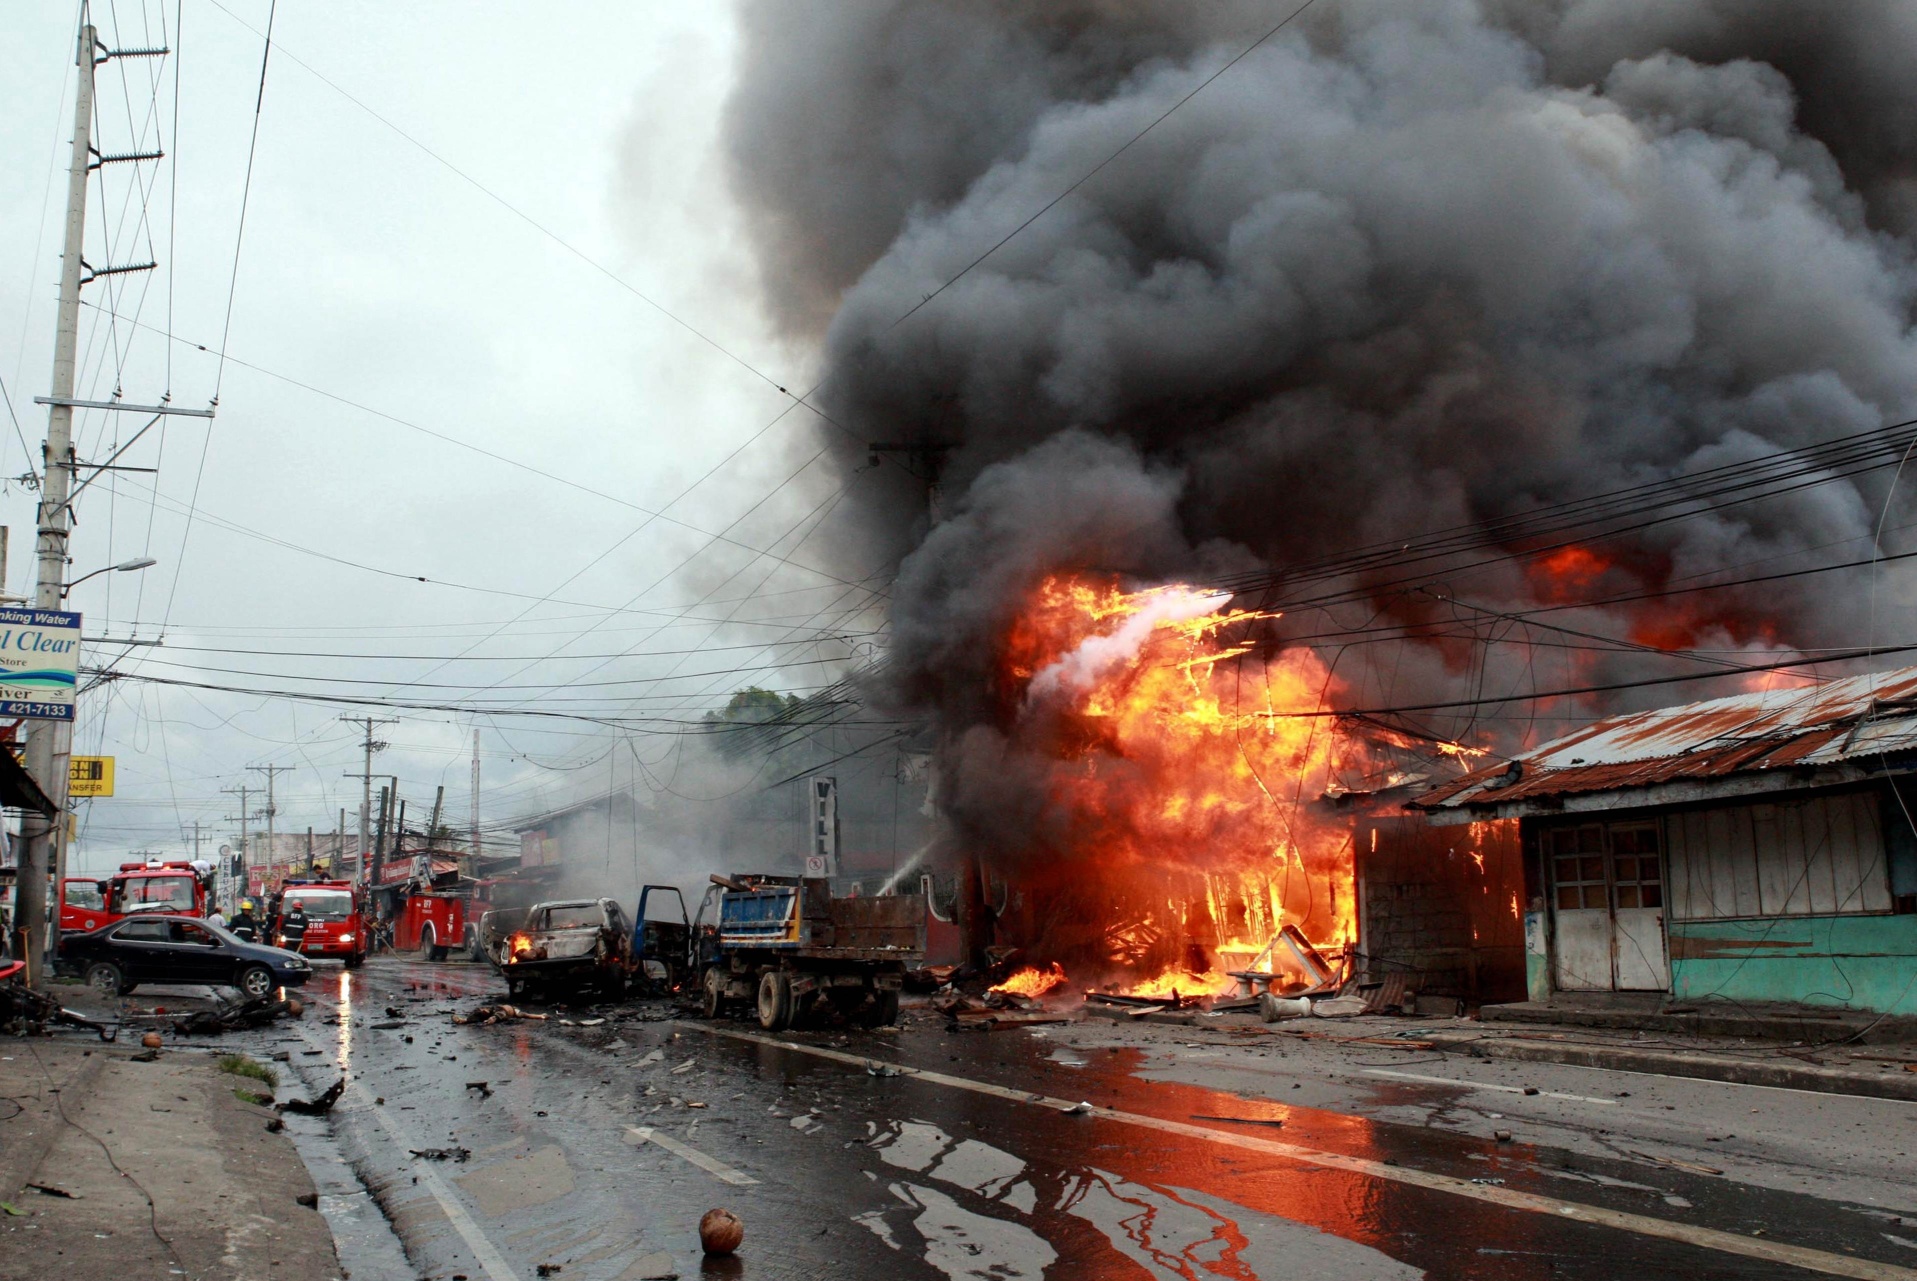 A building is seen on fire after a bomb explosion in Cotabato city, on the southern island of Mindanao on Monday. Photo: AFP